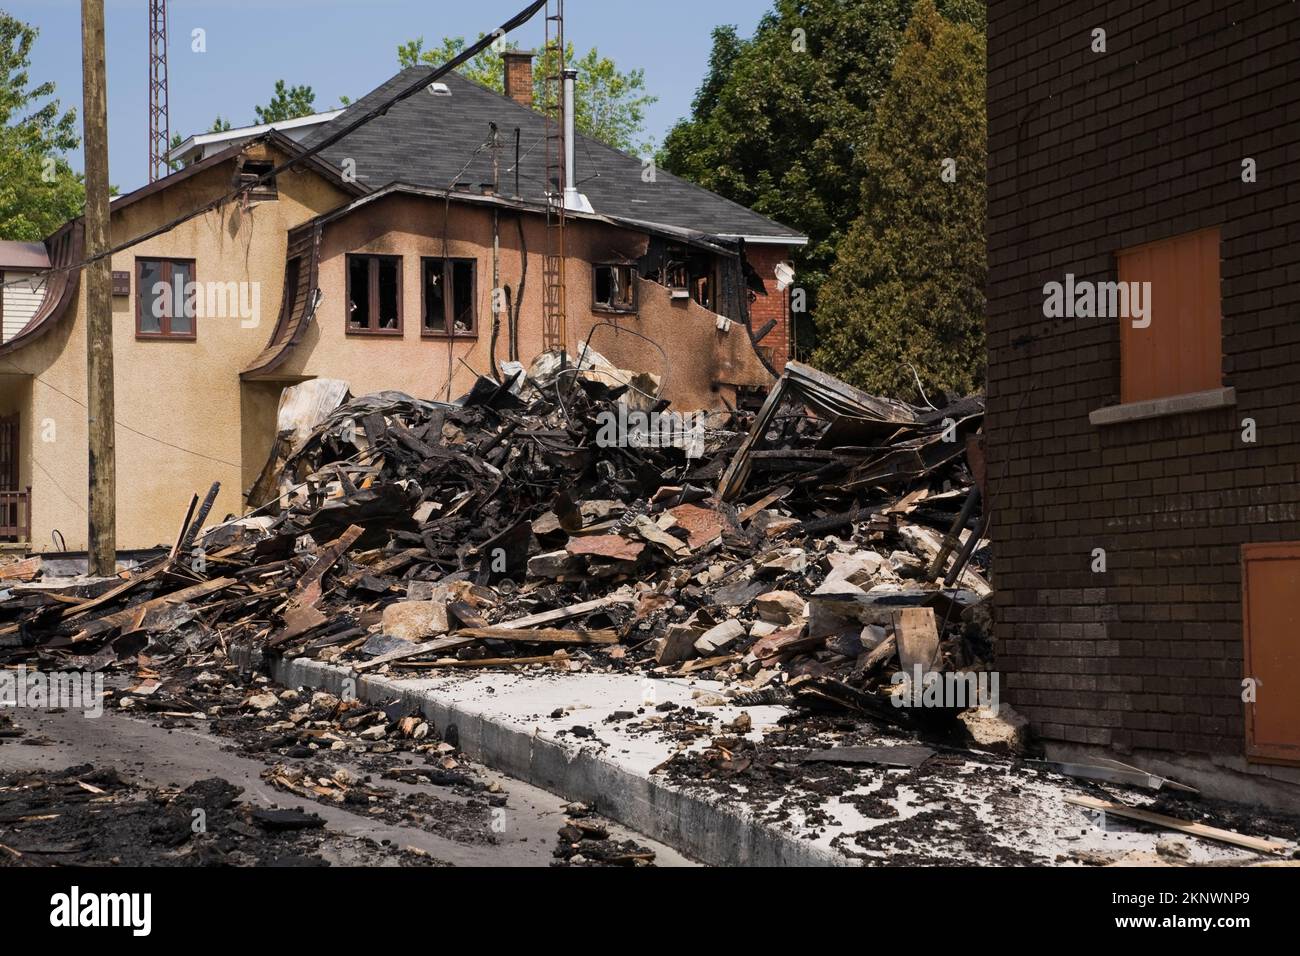 Fire damaged cottage style home next to remnants of burnt down commercial building. Stock Photo